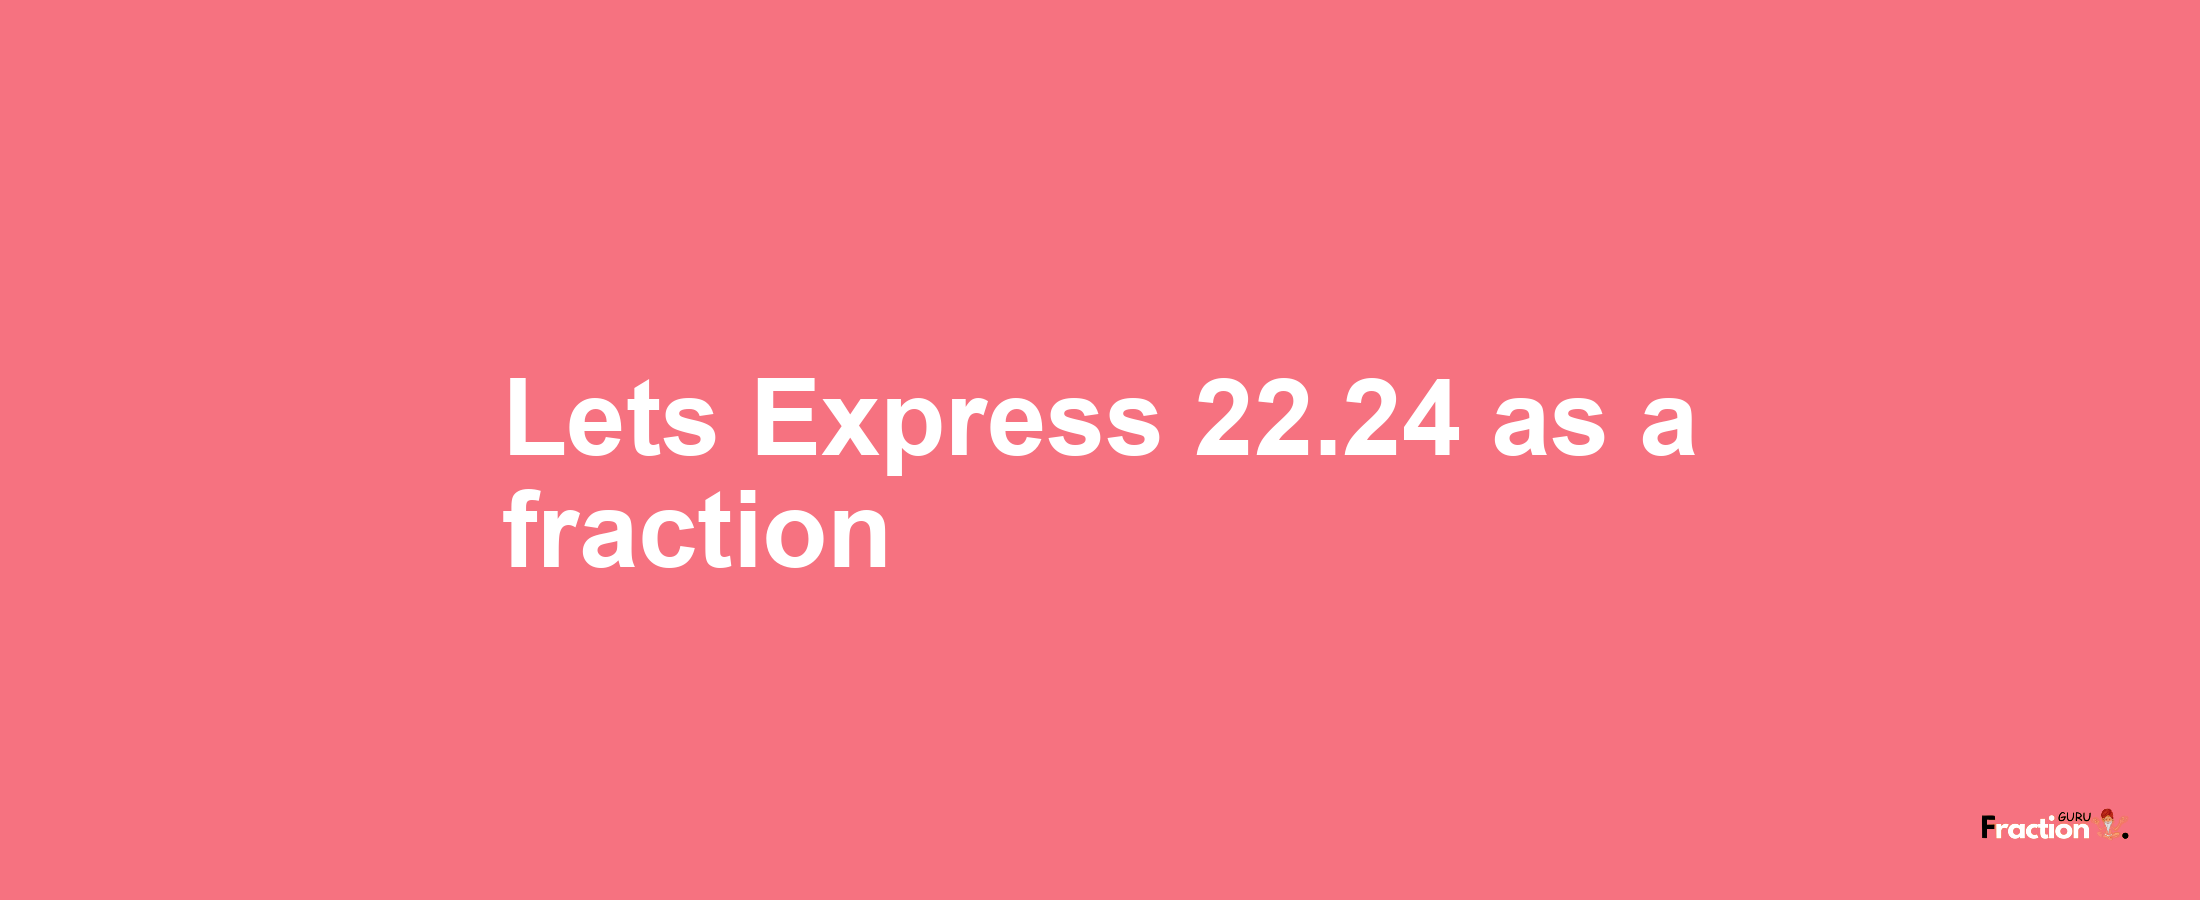 Lets Express 22.24 as afraction